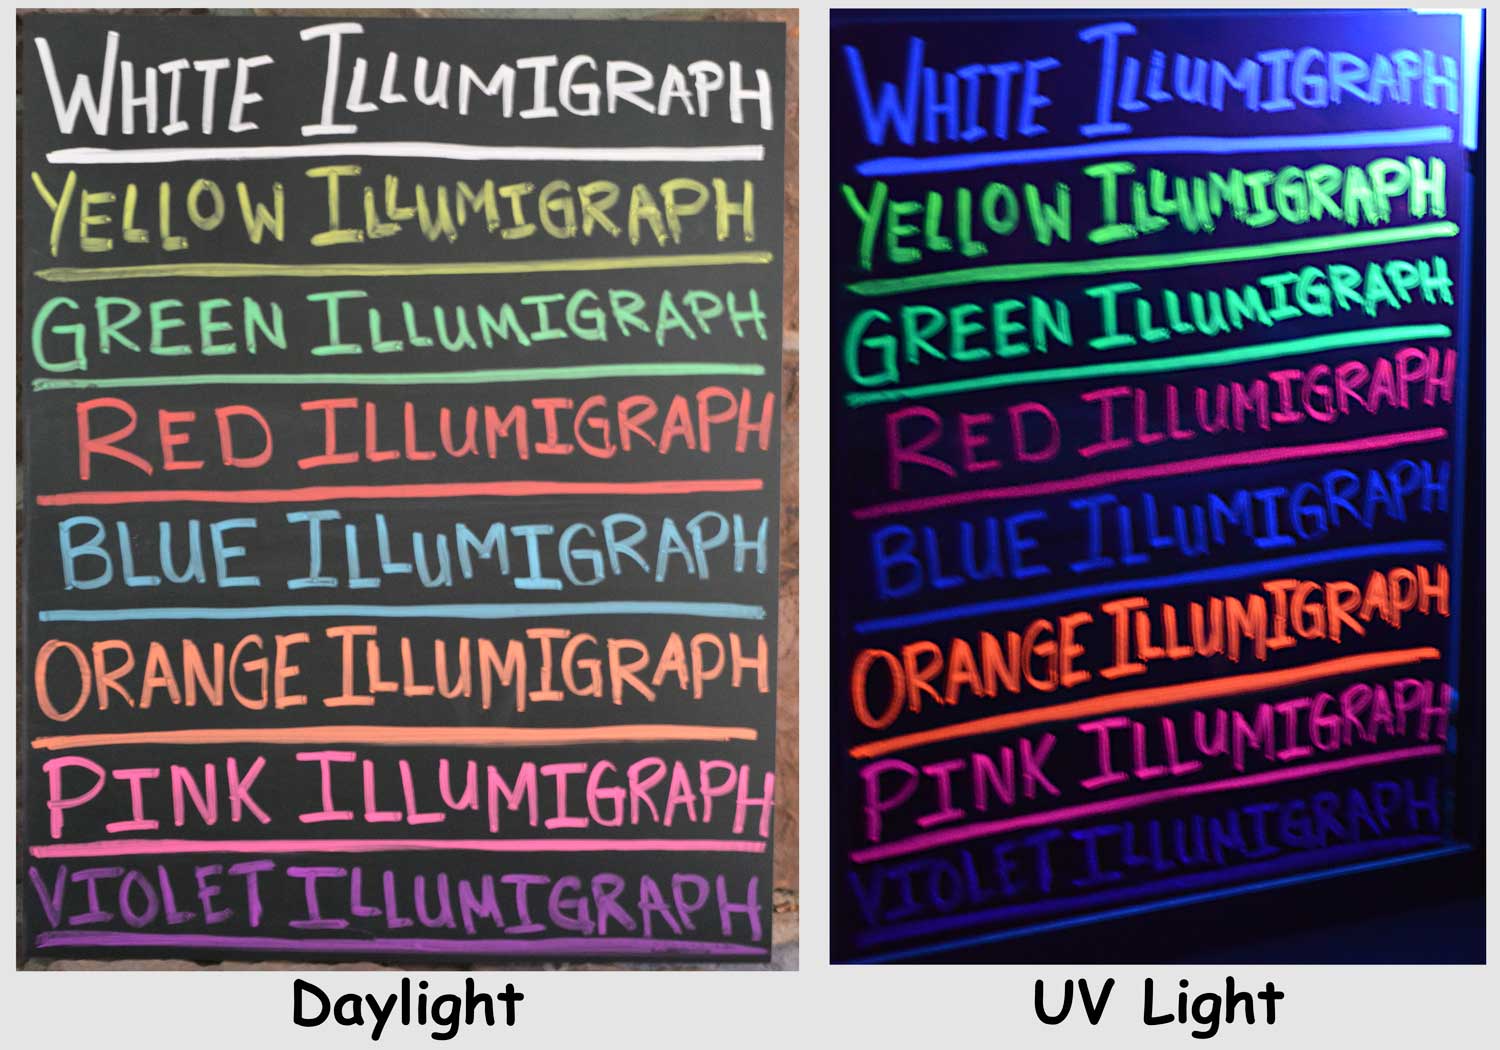 An image showing the same chalkboard side by side in different lighting. The boards have the text, "White Illumigraph, Yellow Illumigraph, Green Illumigraph, Red Illumigraph, Blue Illumigraph, Orange Illumigraph, Pink Illumigraph, Violet Illumigraph" written with UV markers in each color. The left side of the image shows the board in regular daylight, while the right side shows the board illuminated in black light.